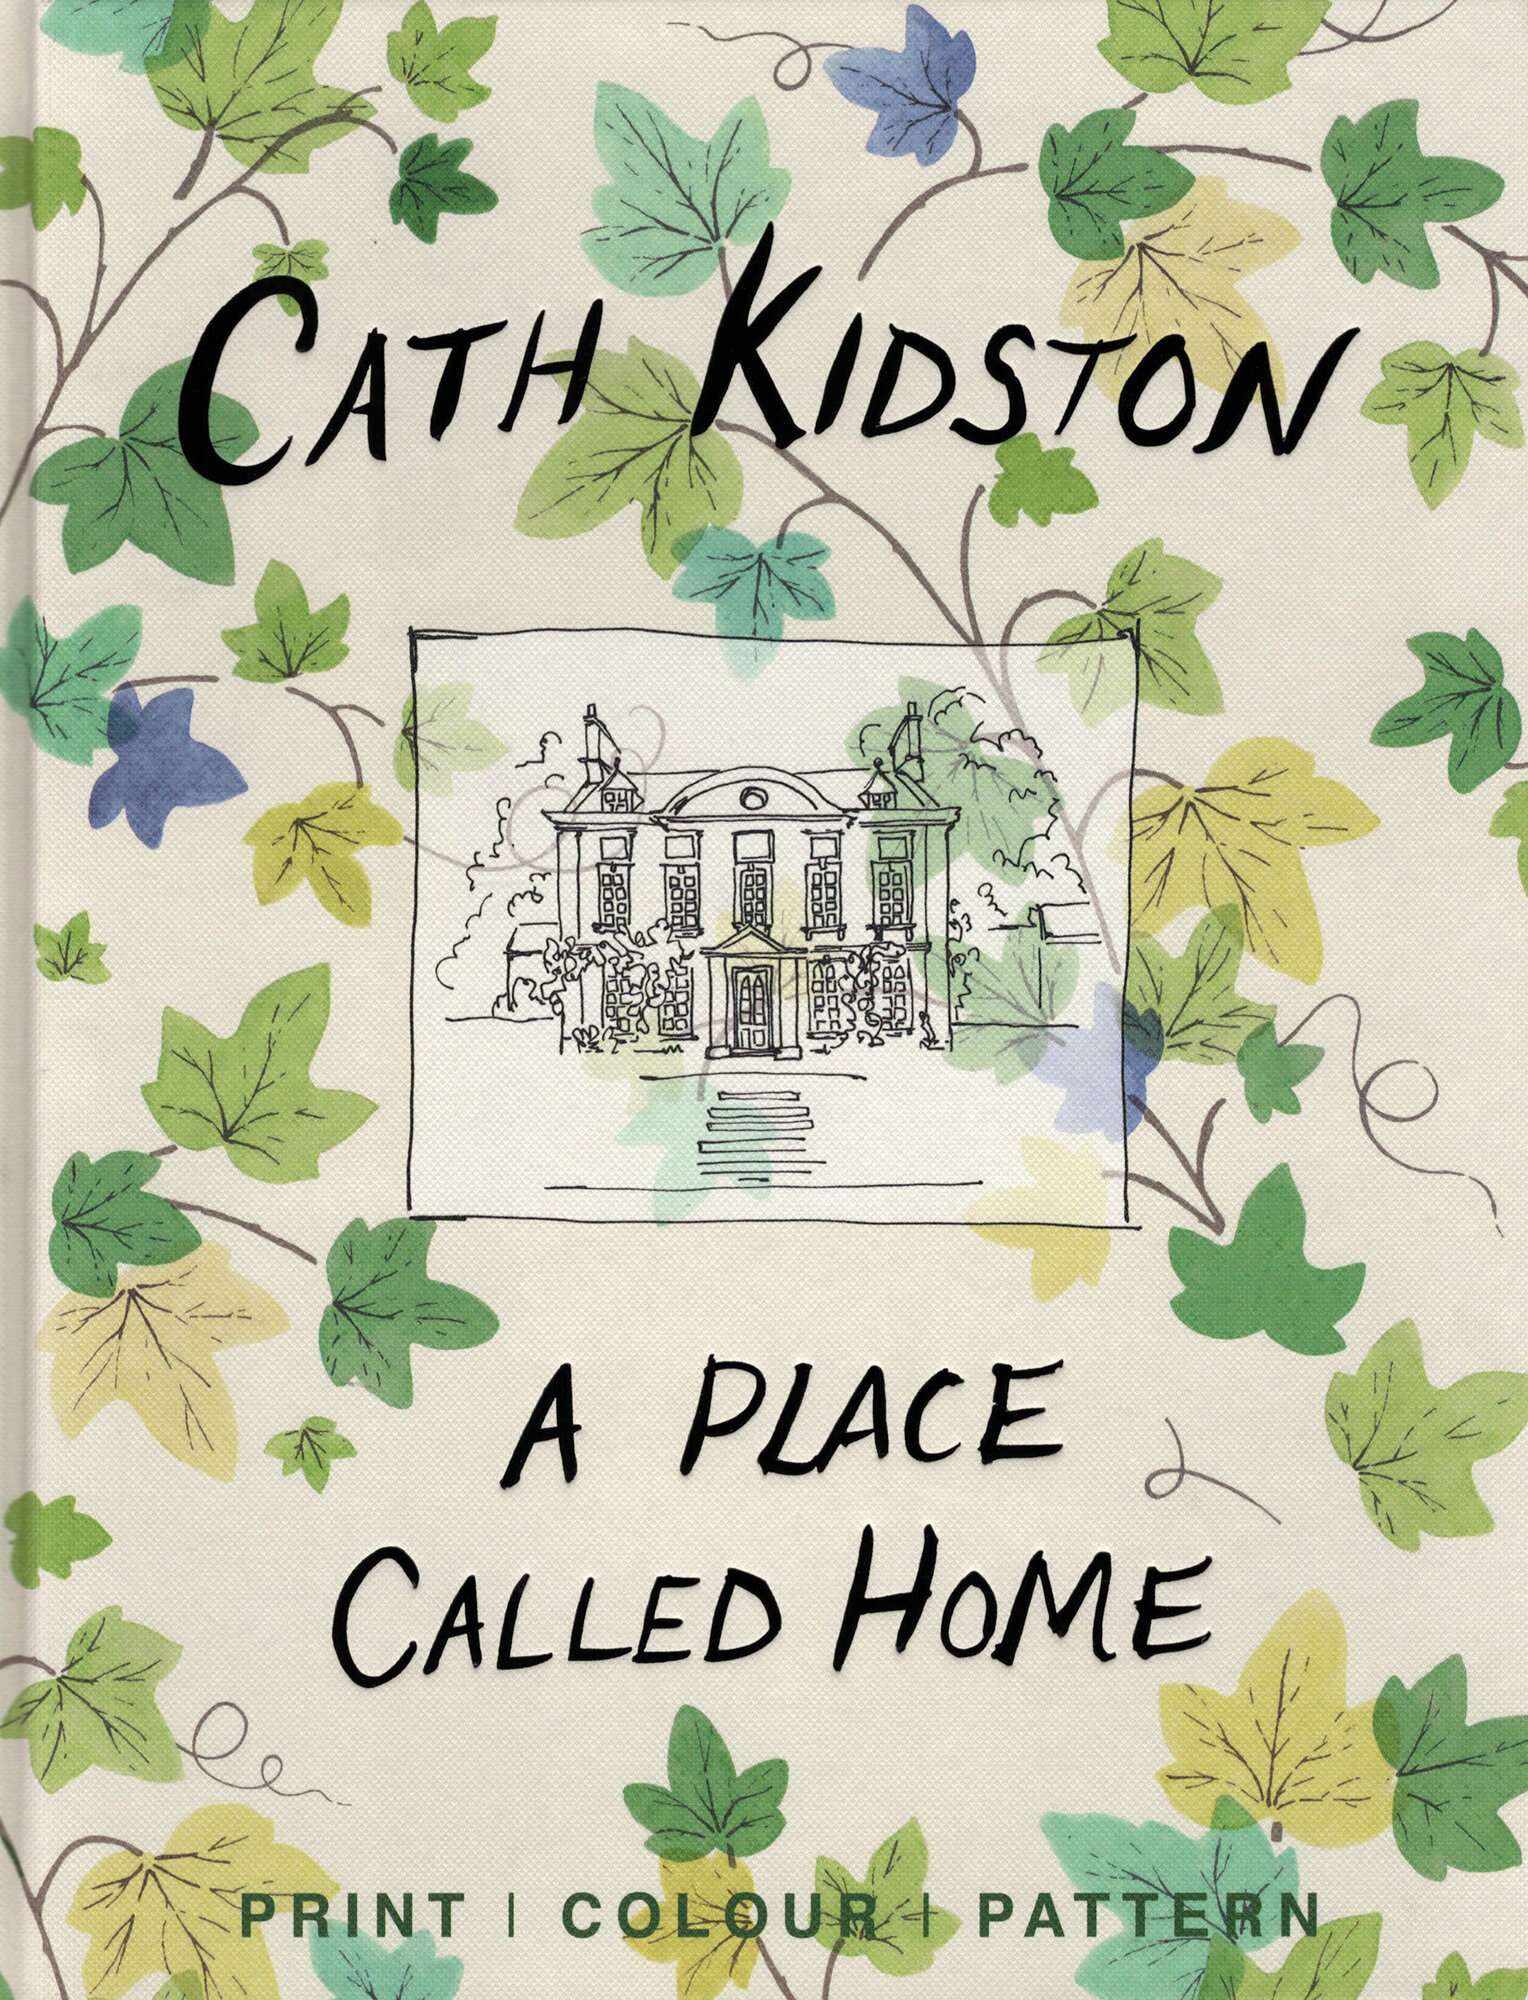 A Place Called Home. Print colour pattern | Kidston Cath